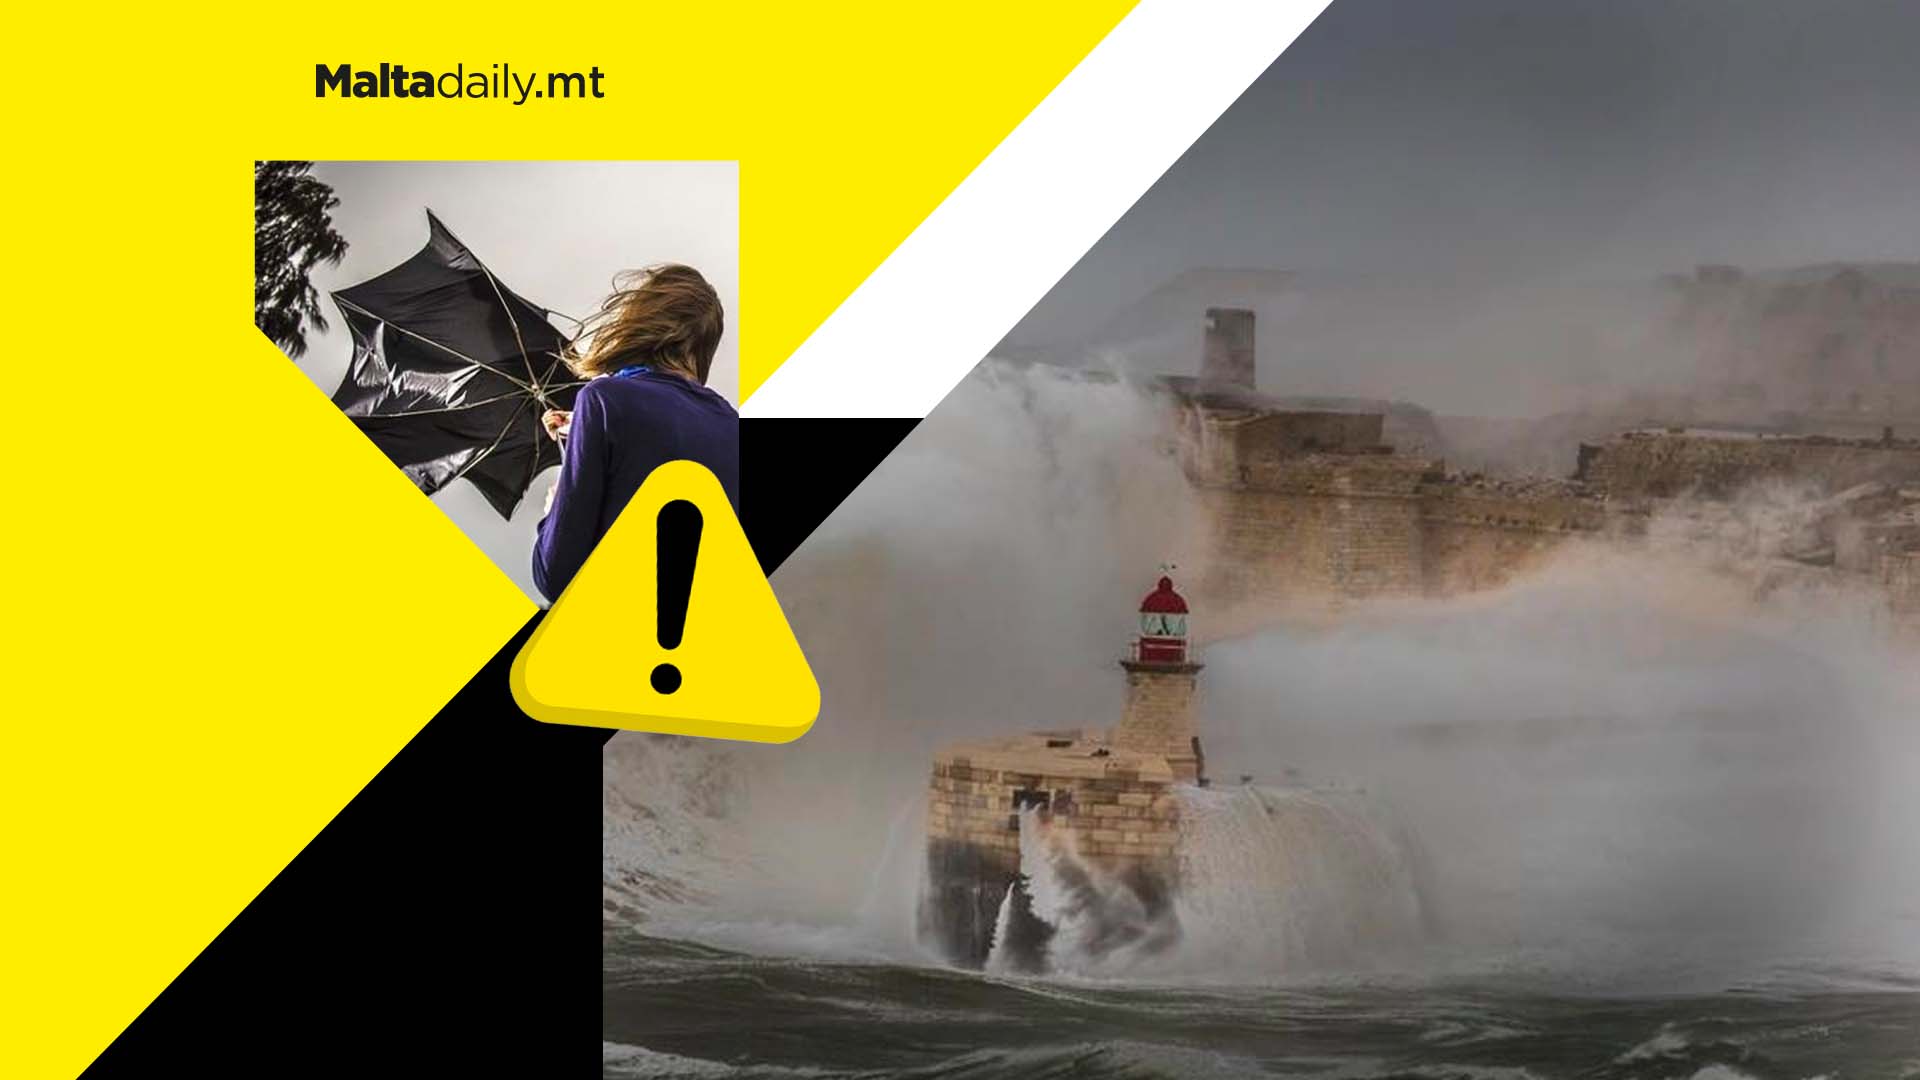 Strong winds to persist as Malta issues weather warnings